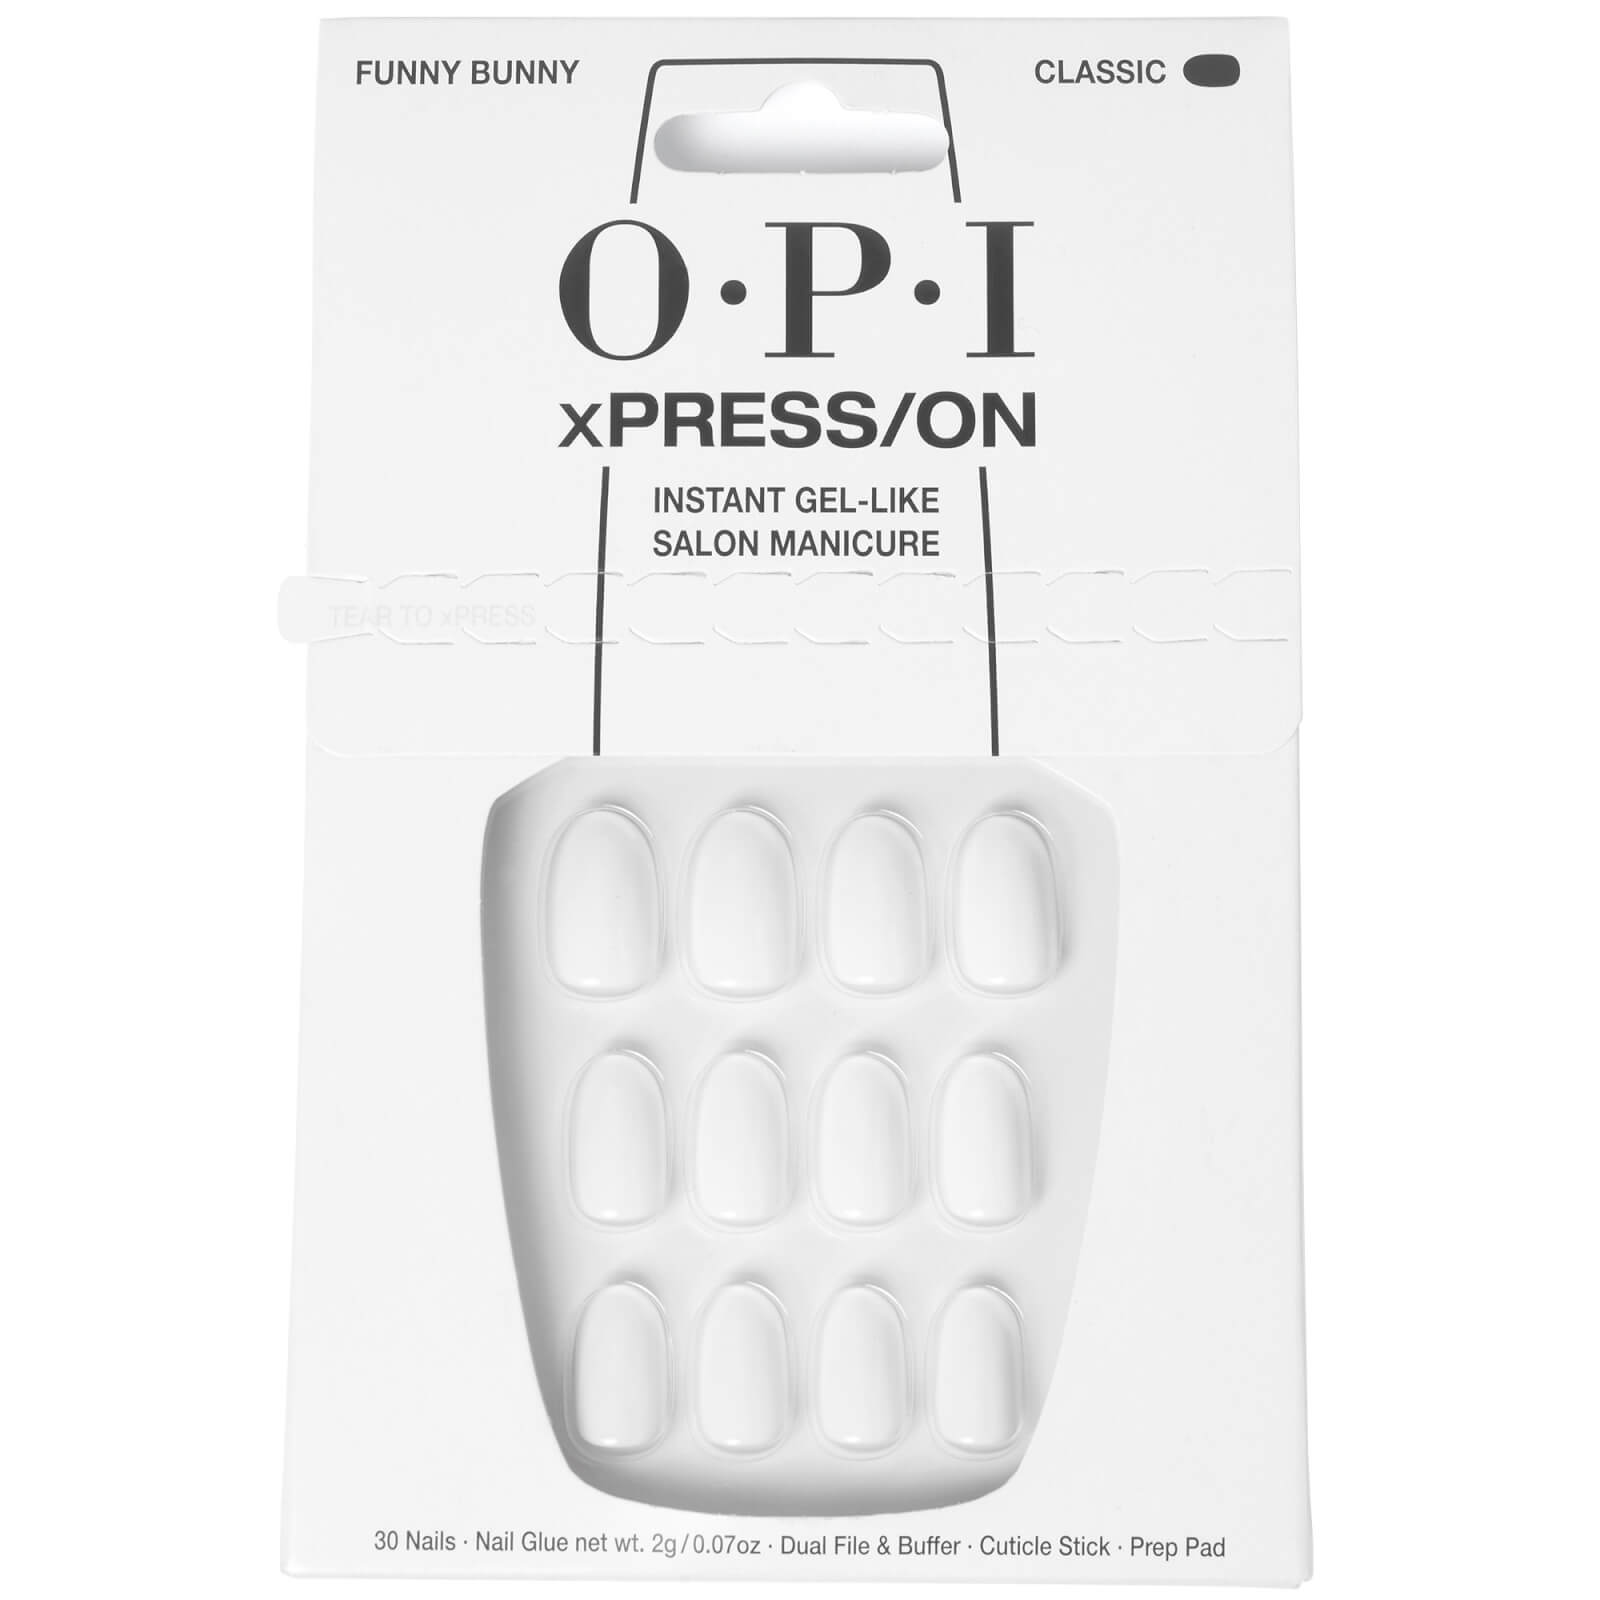 Opi Xpress/on - Funny Bunny Press On Nails Gel-like Salon Manicure In White